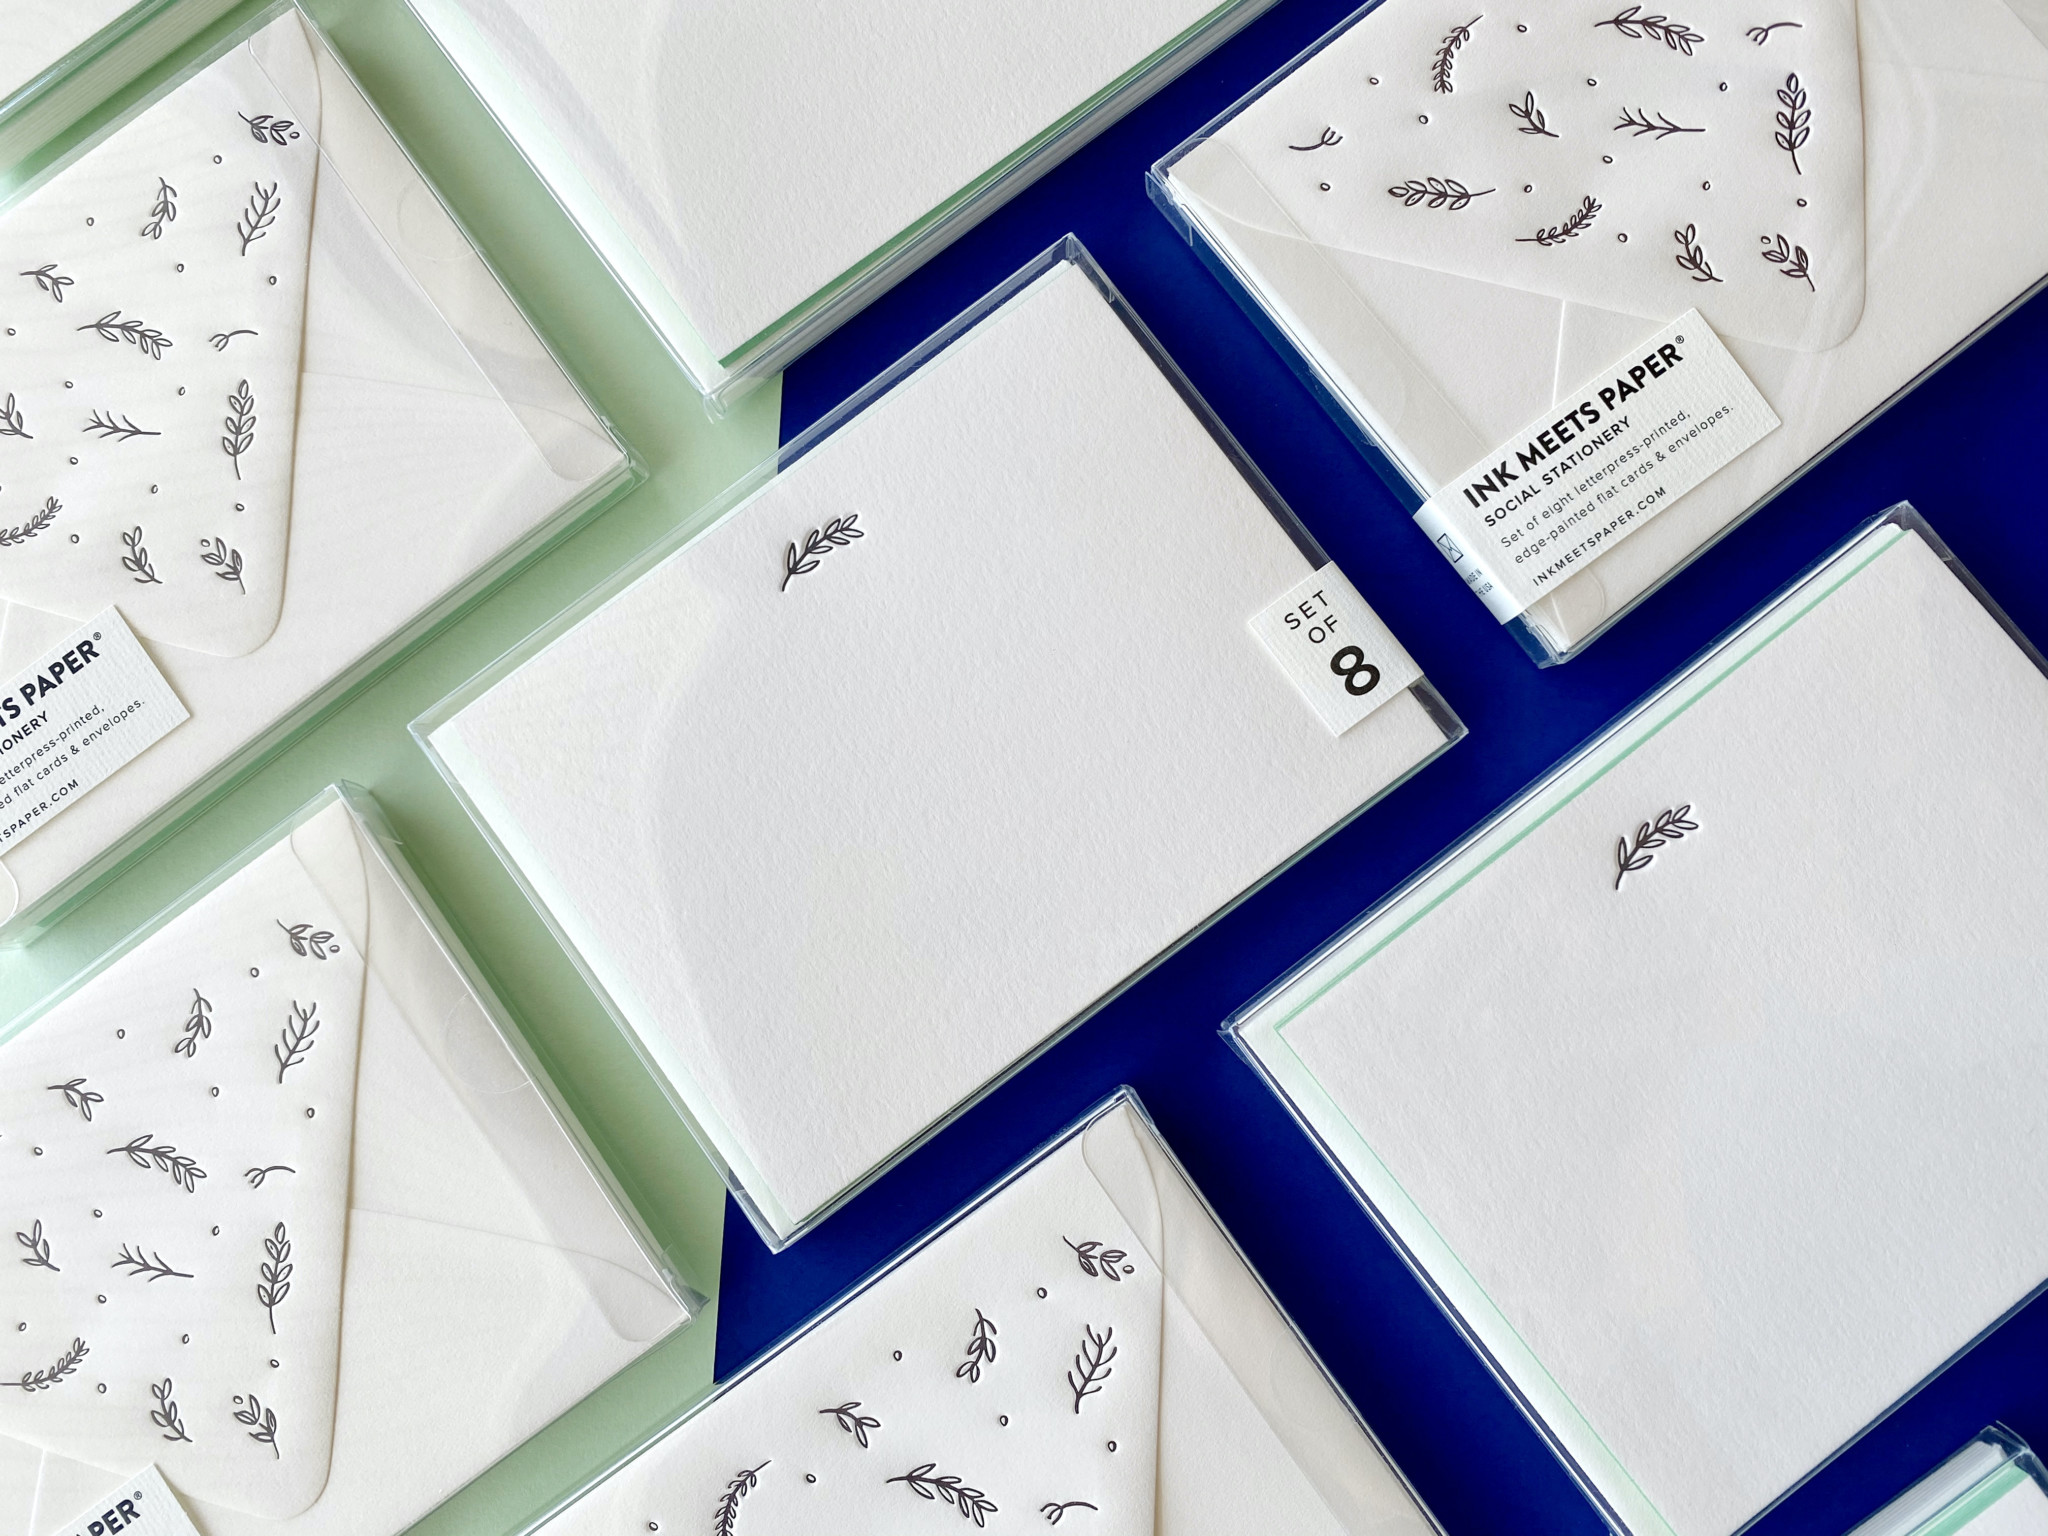 Botanics social stationery boxed sets laid out in grid over layered paper background